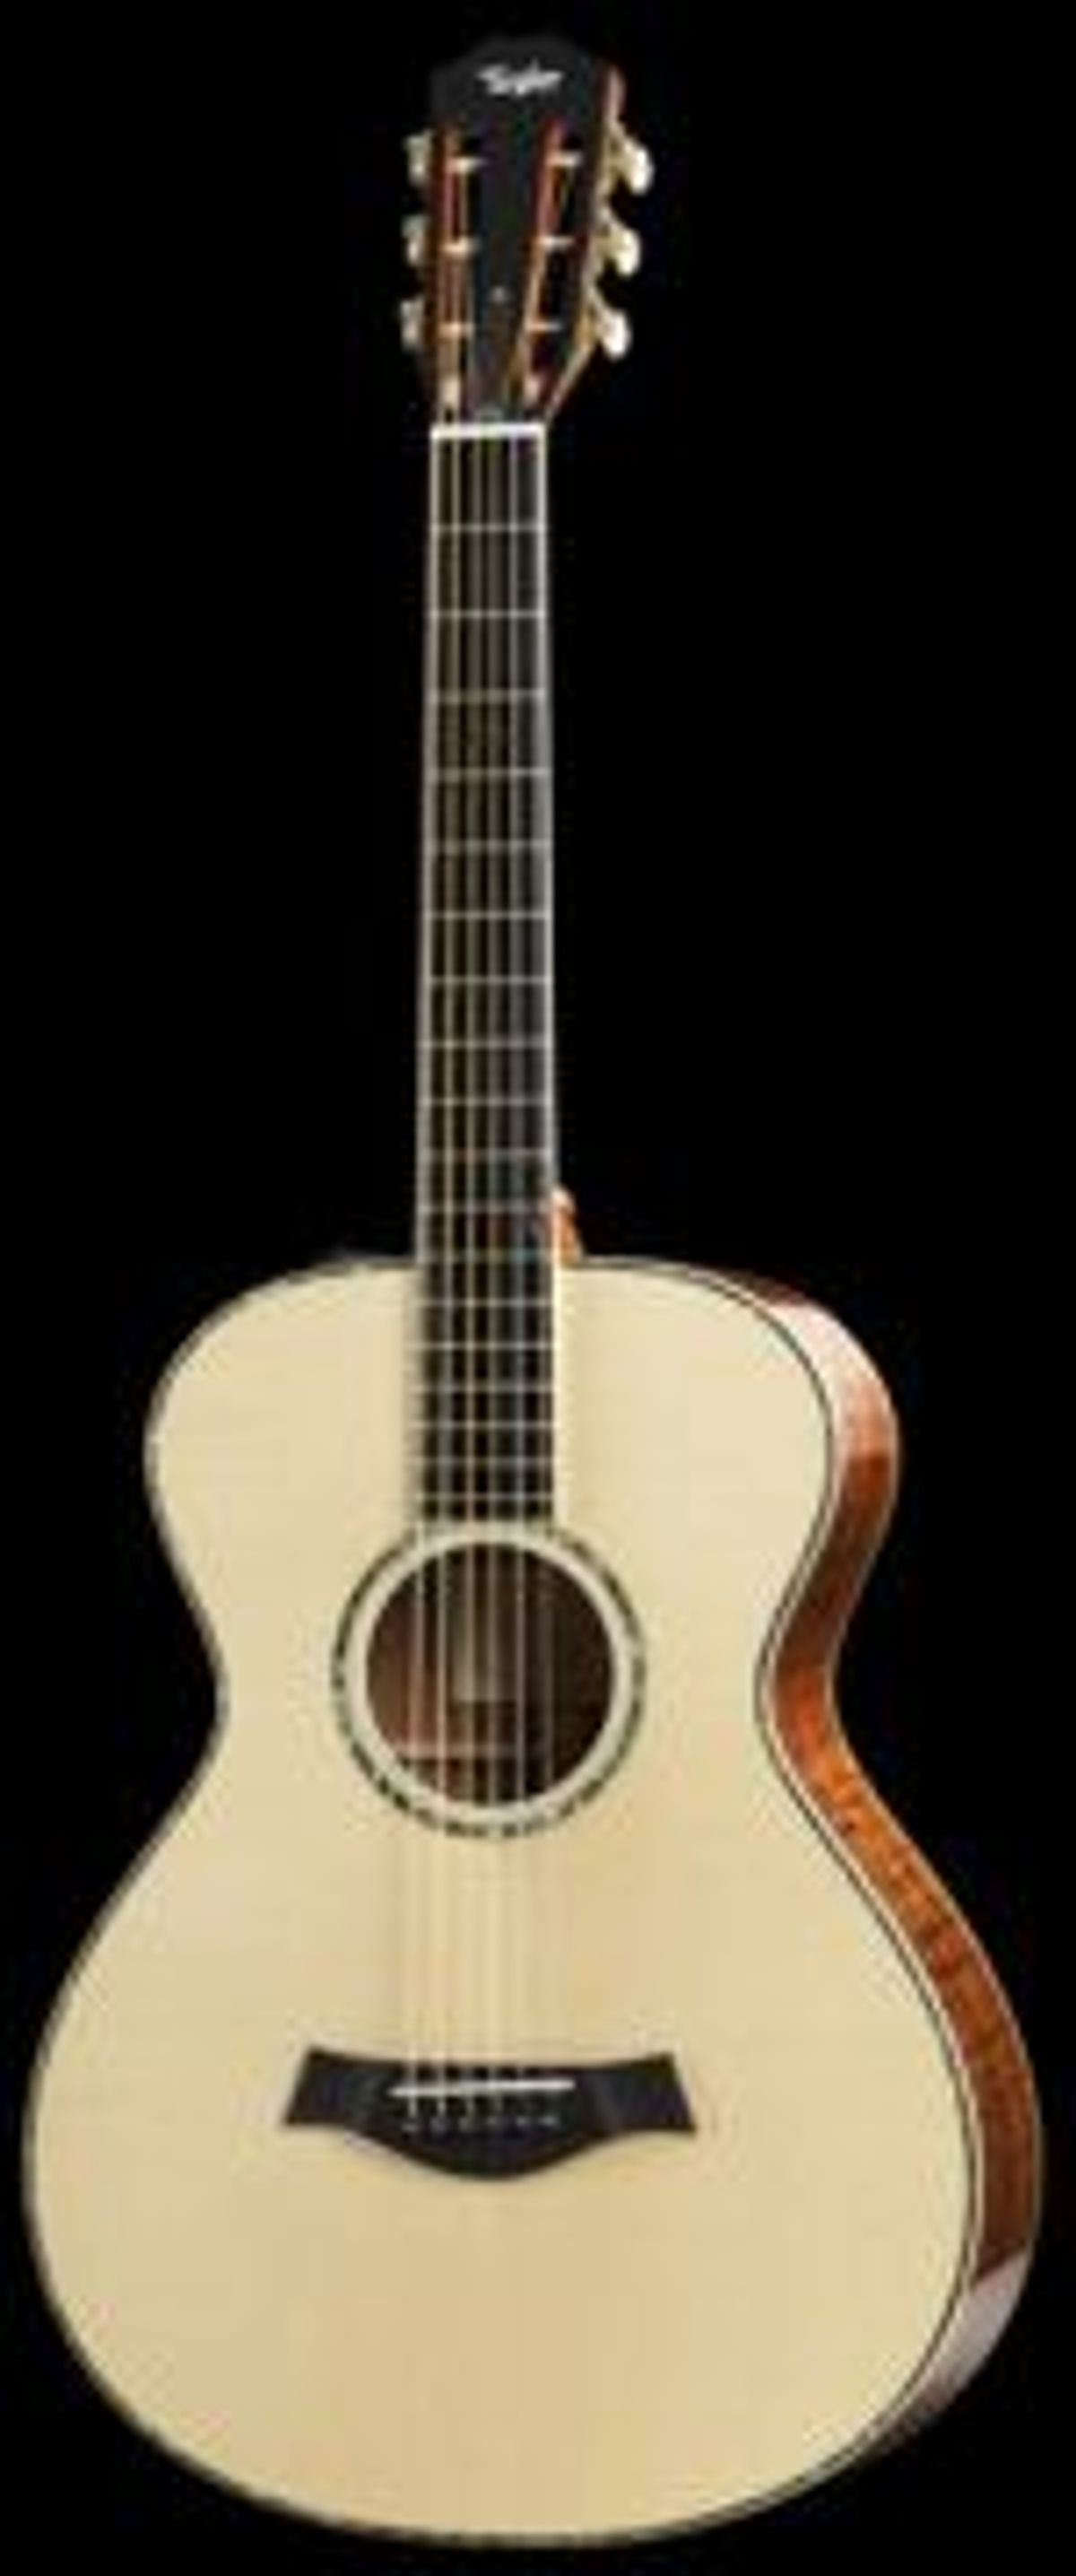 Taylor 12-Fret and Parlor Guitars Join 35th Anniversary Celebration